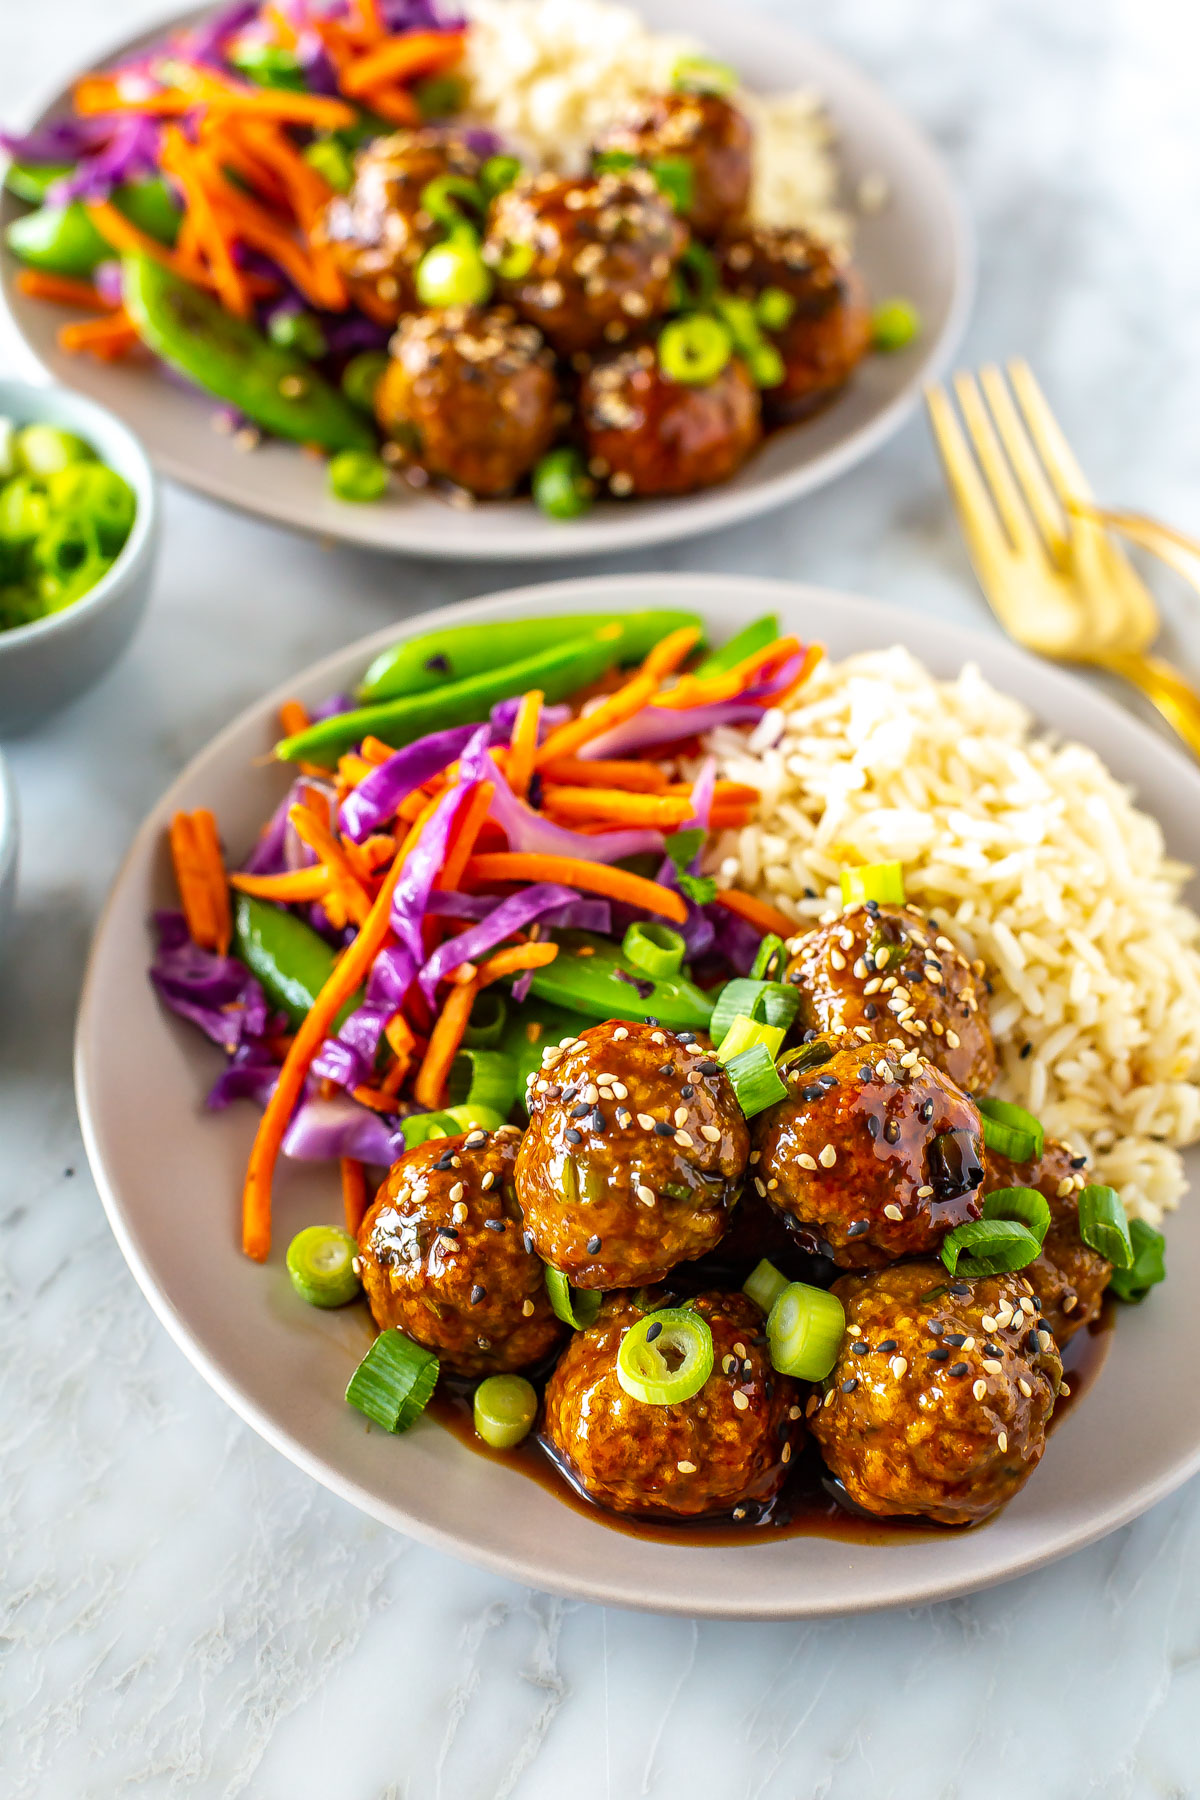 A close-up of a bowl with a bed of rice, side of stir fried veggies and sticky teriyaki chicken meatballs.